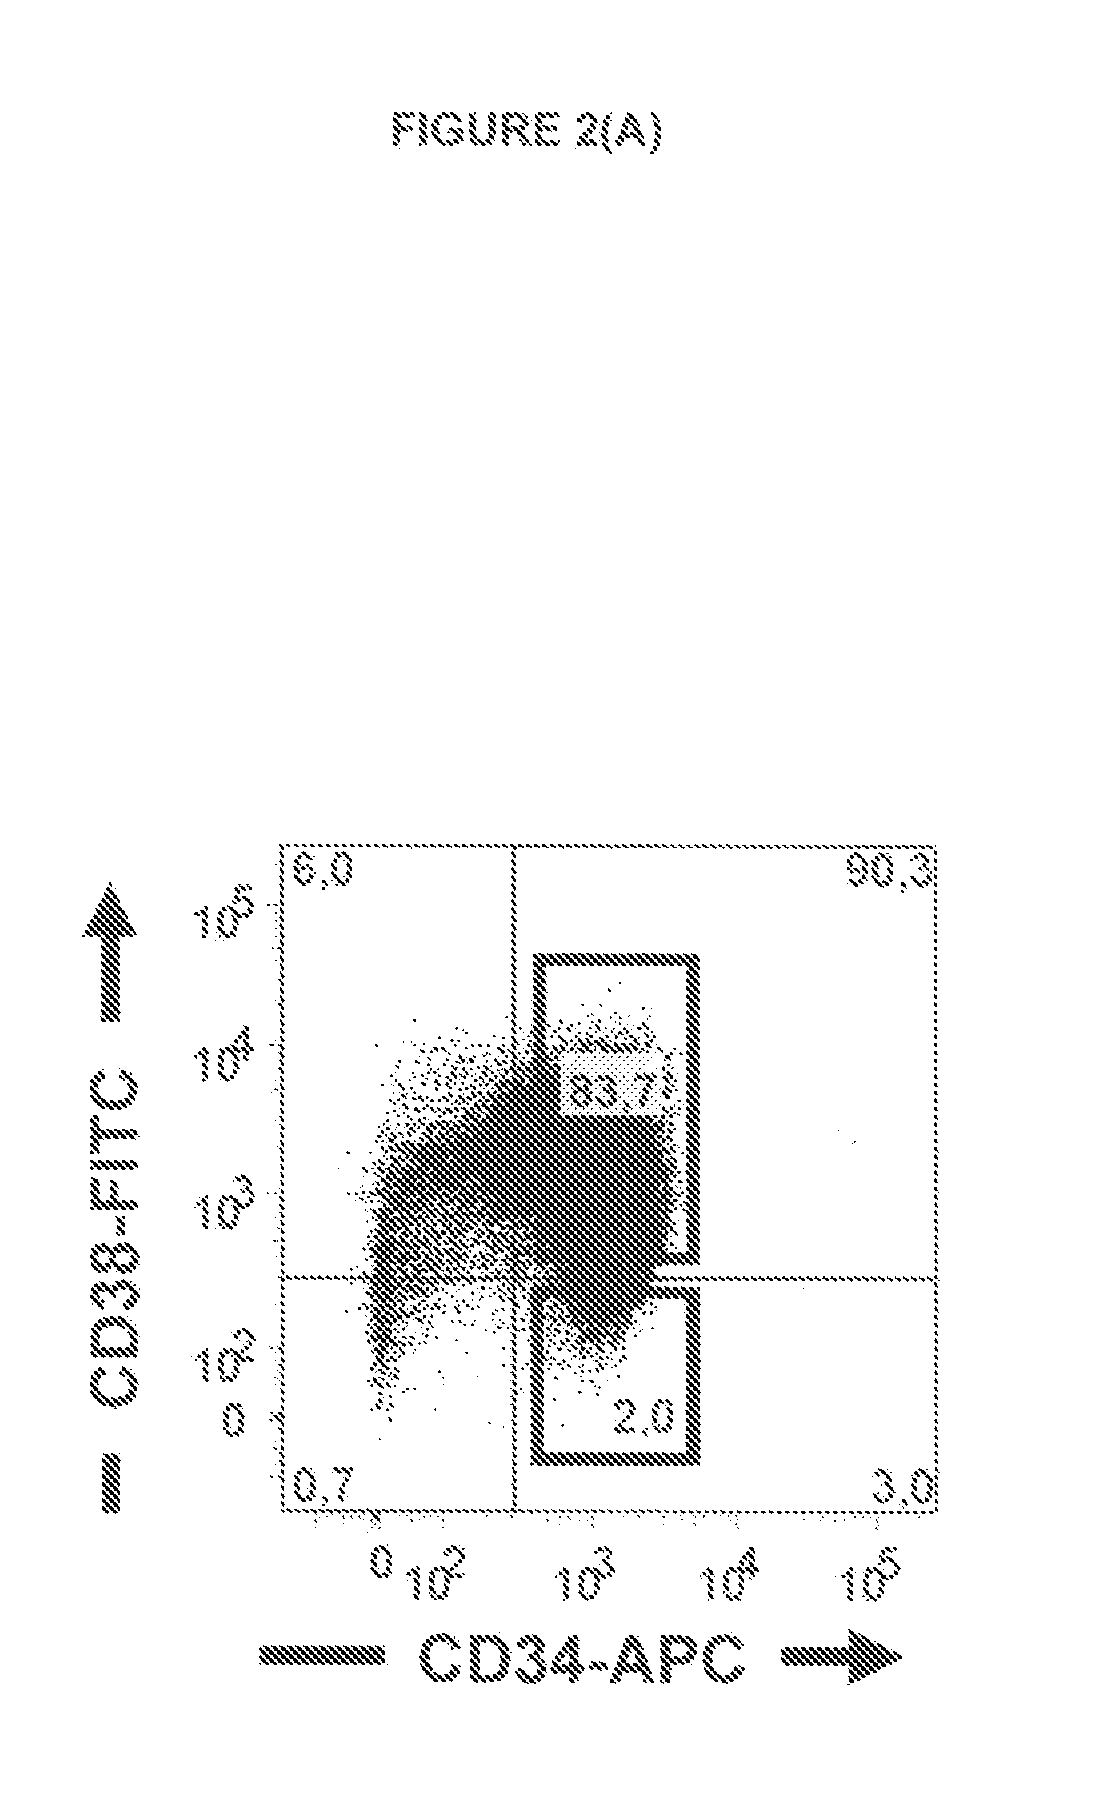 Anti-IL1RAP Antibodies and Their Use for Treating Human